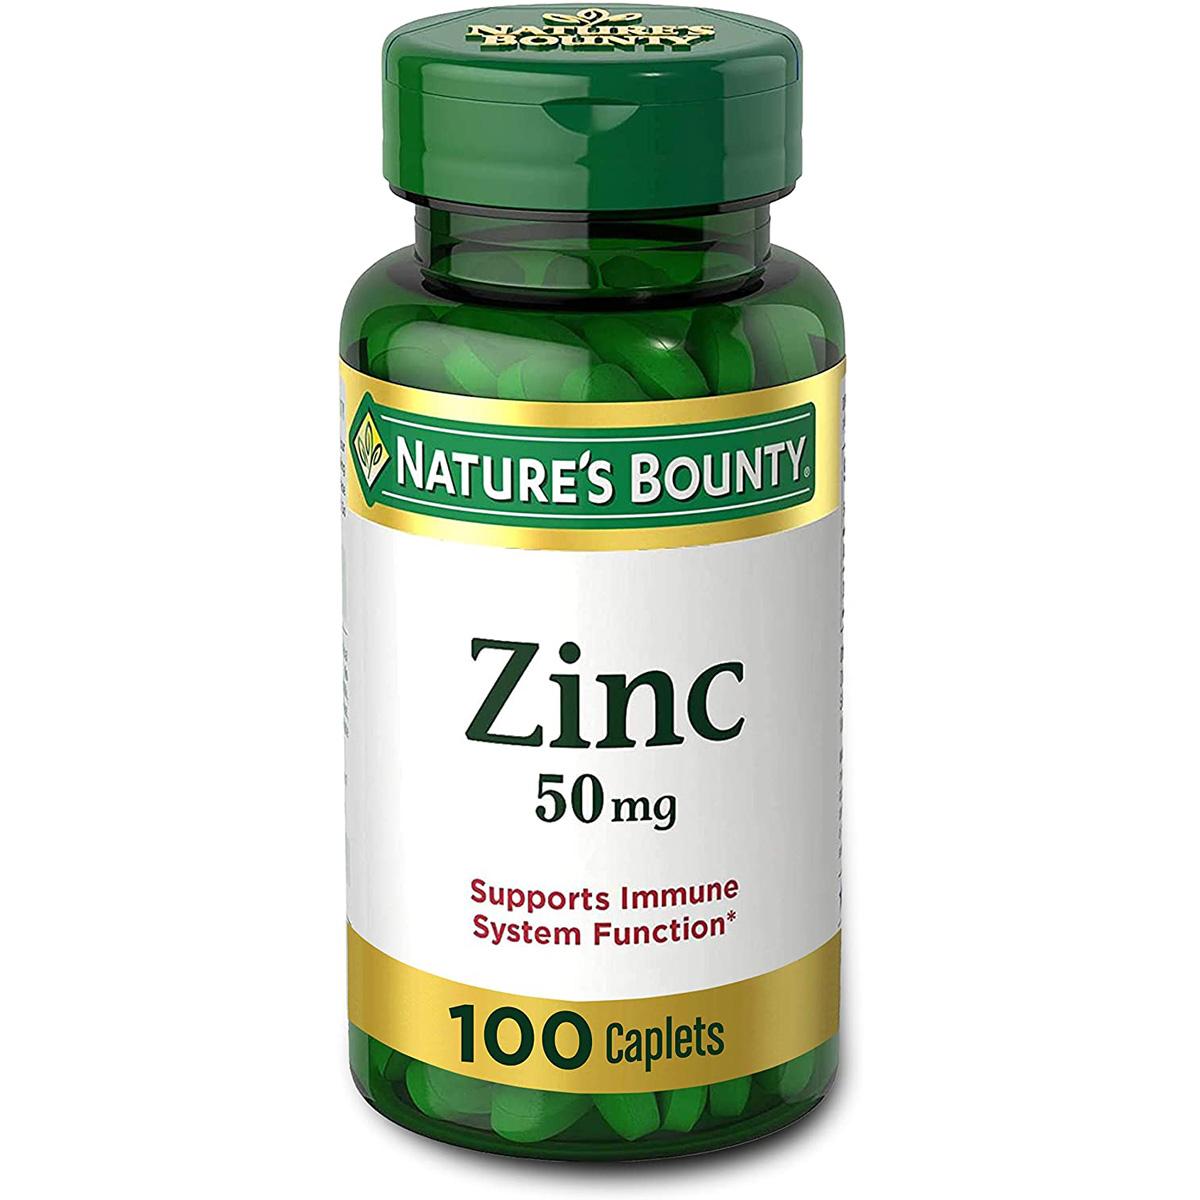 100 Natures Bounty Zinc 50mg Caplets for $3.29 Shipped